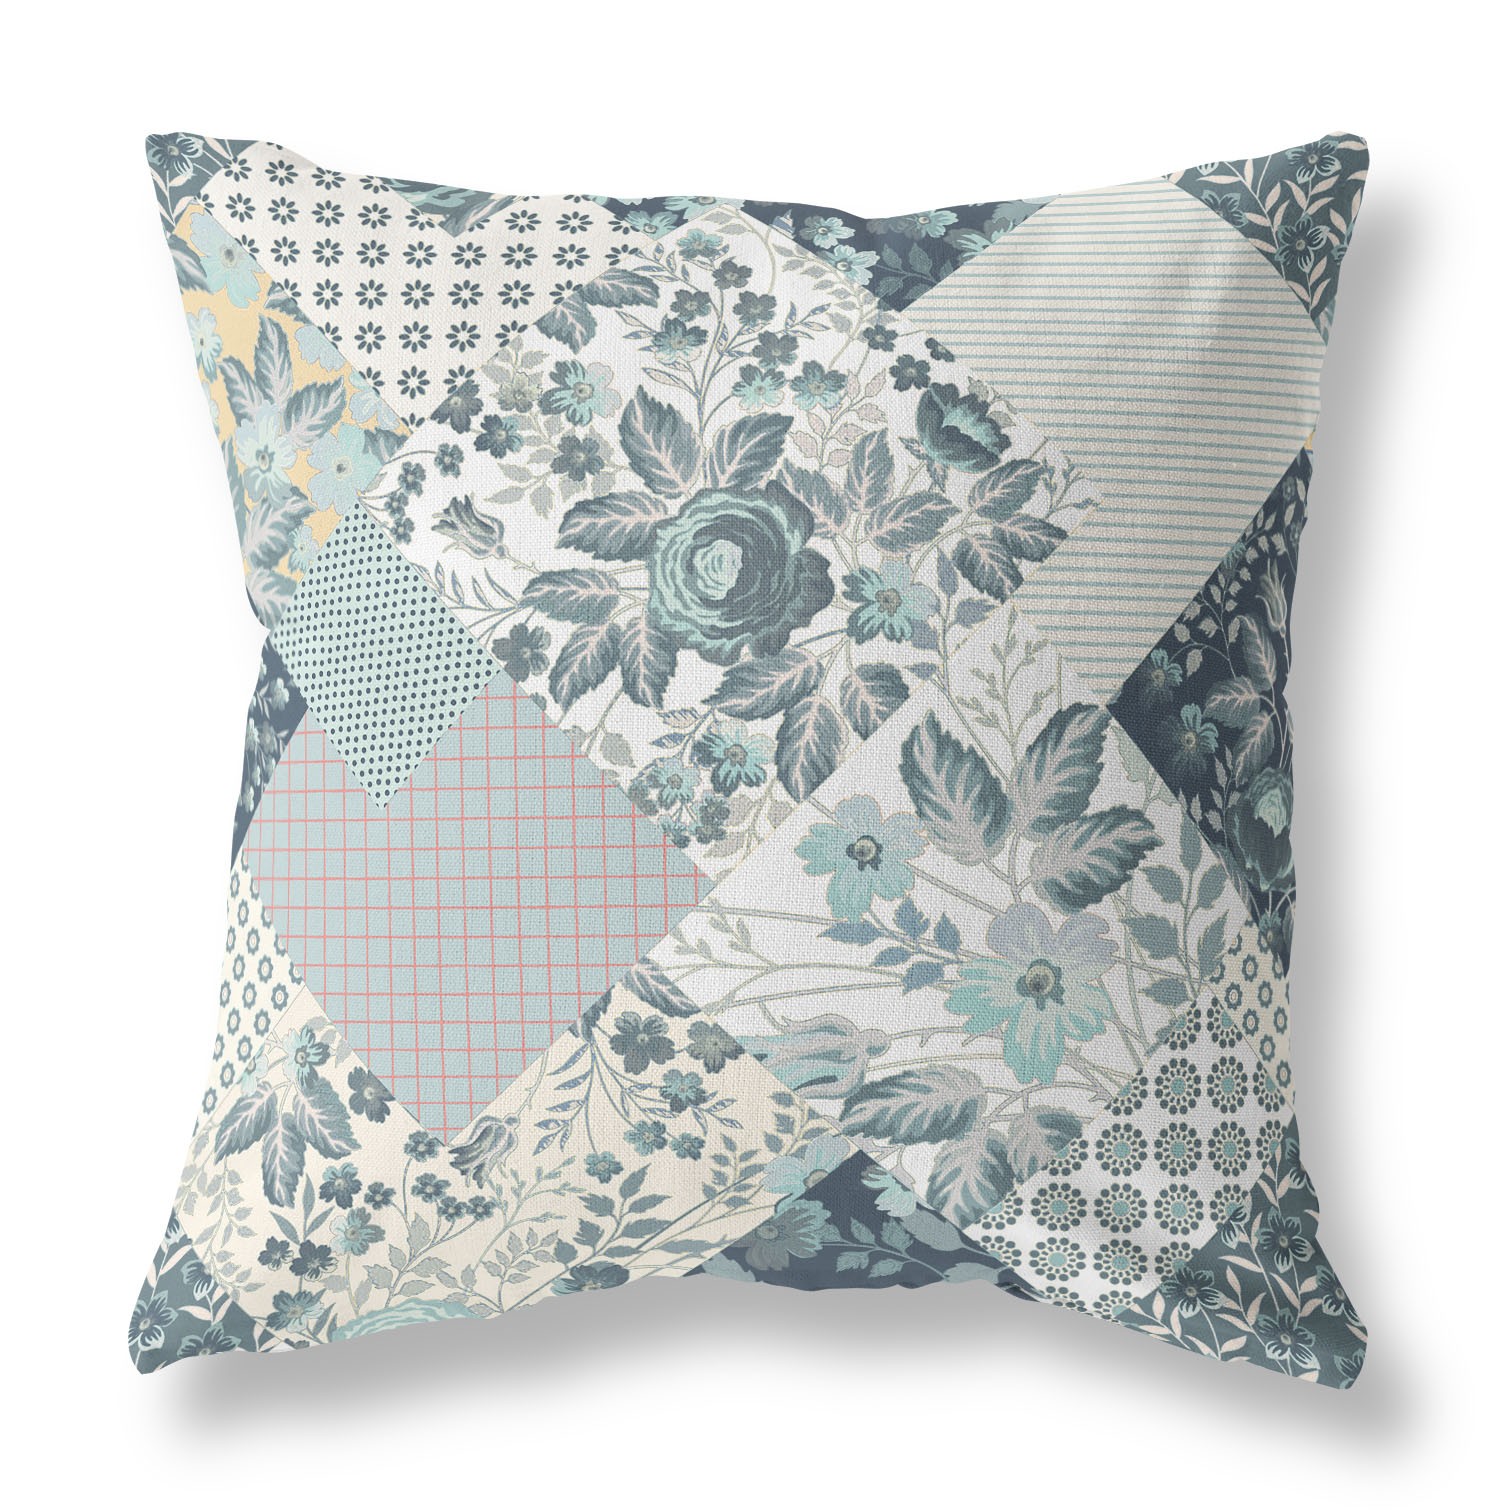 18" Teal White Boho Floral Indoor Outdoor Throw Pillow-413911-1